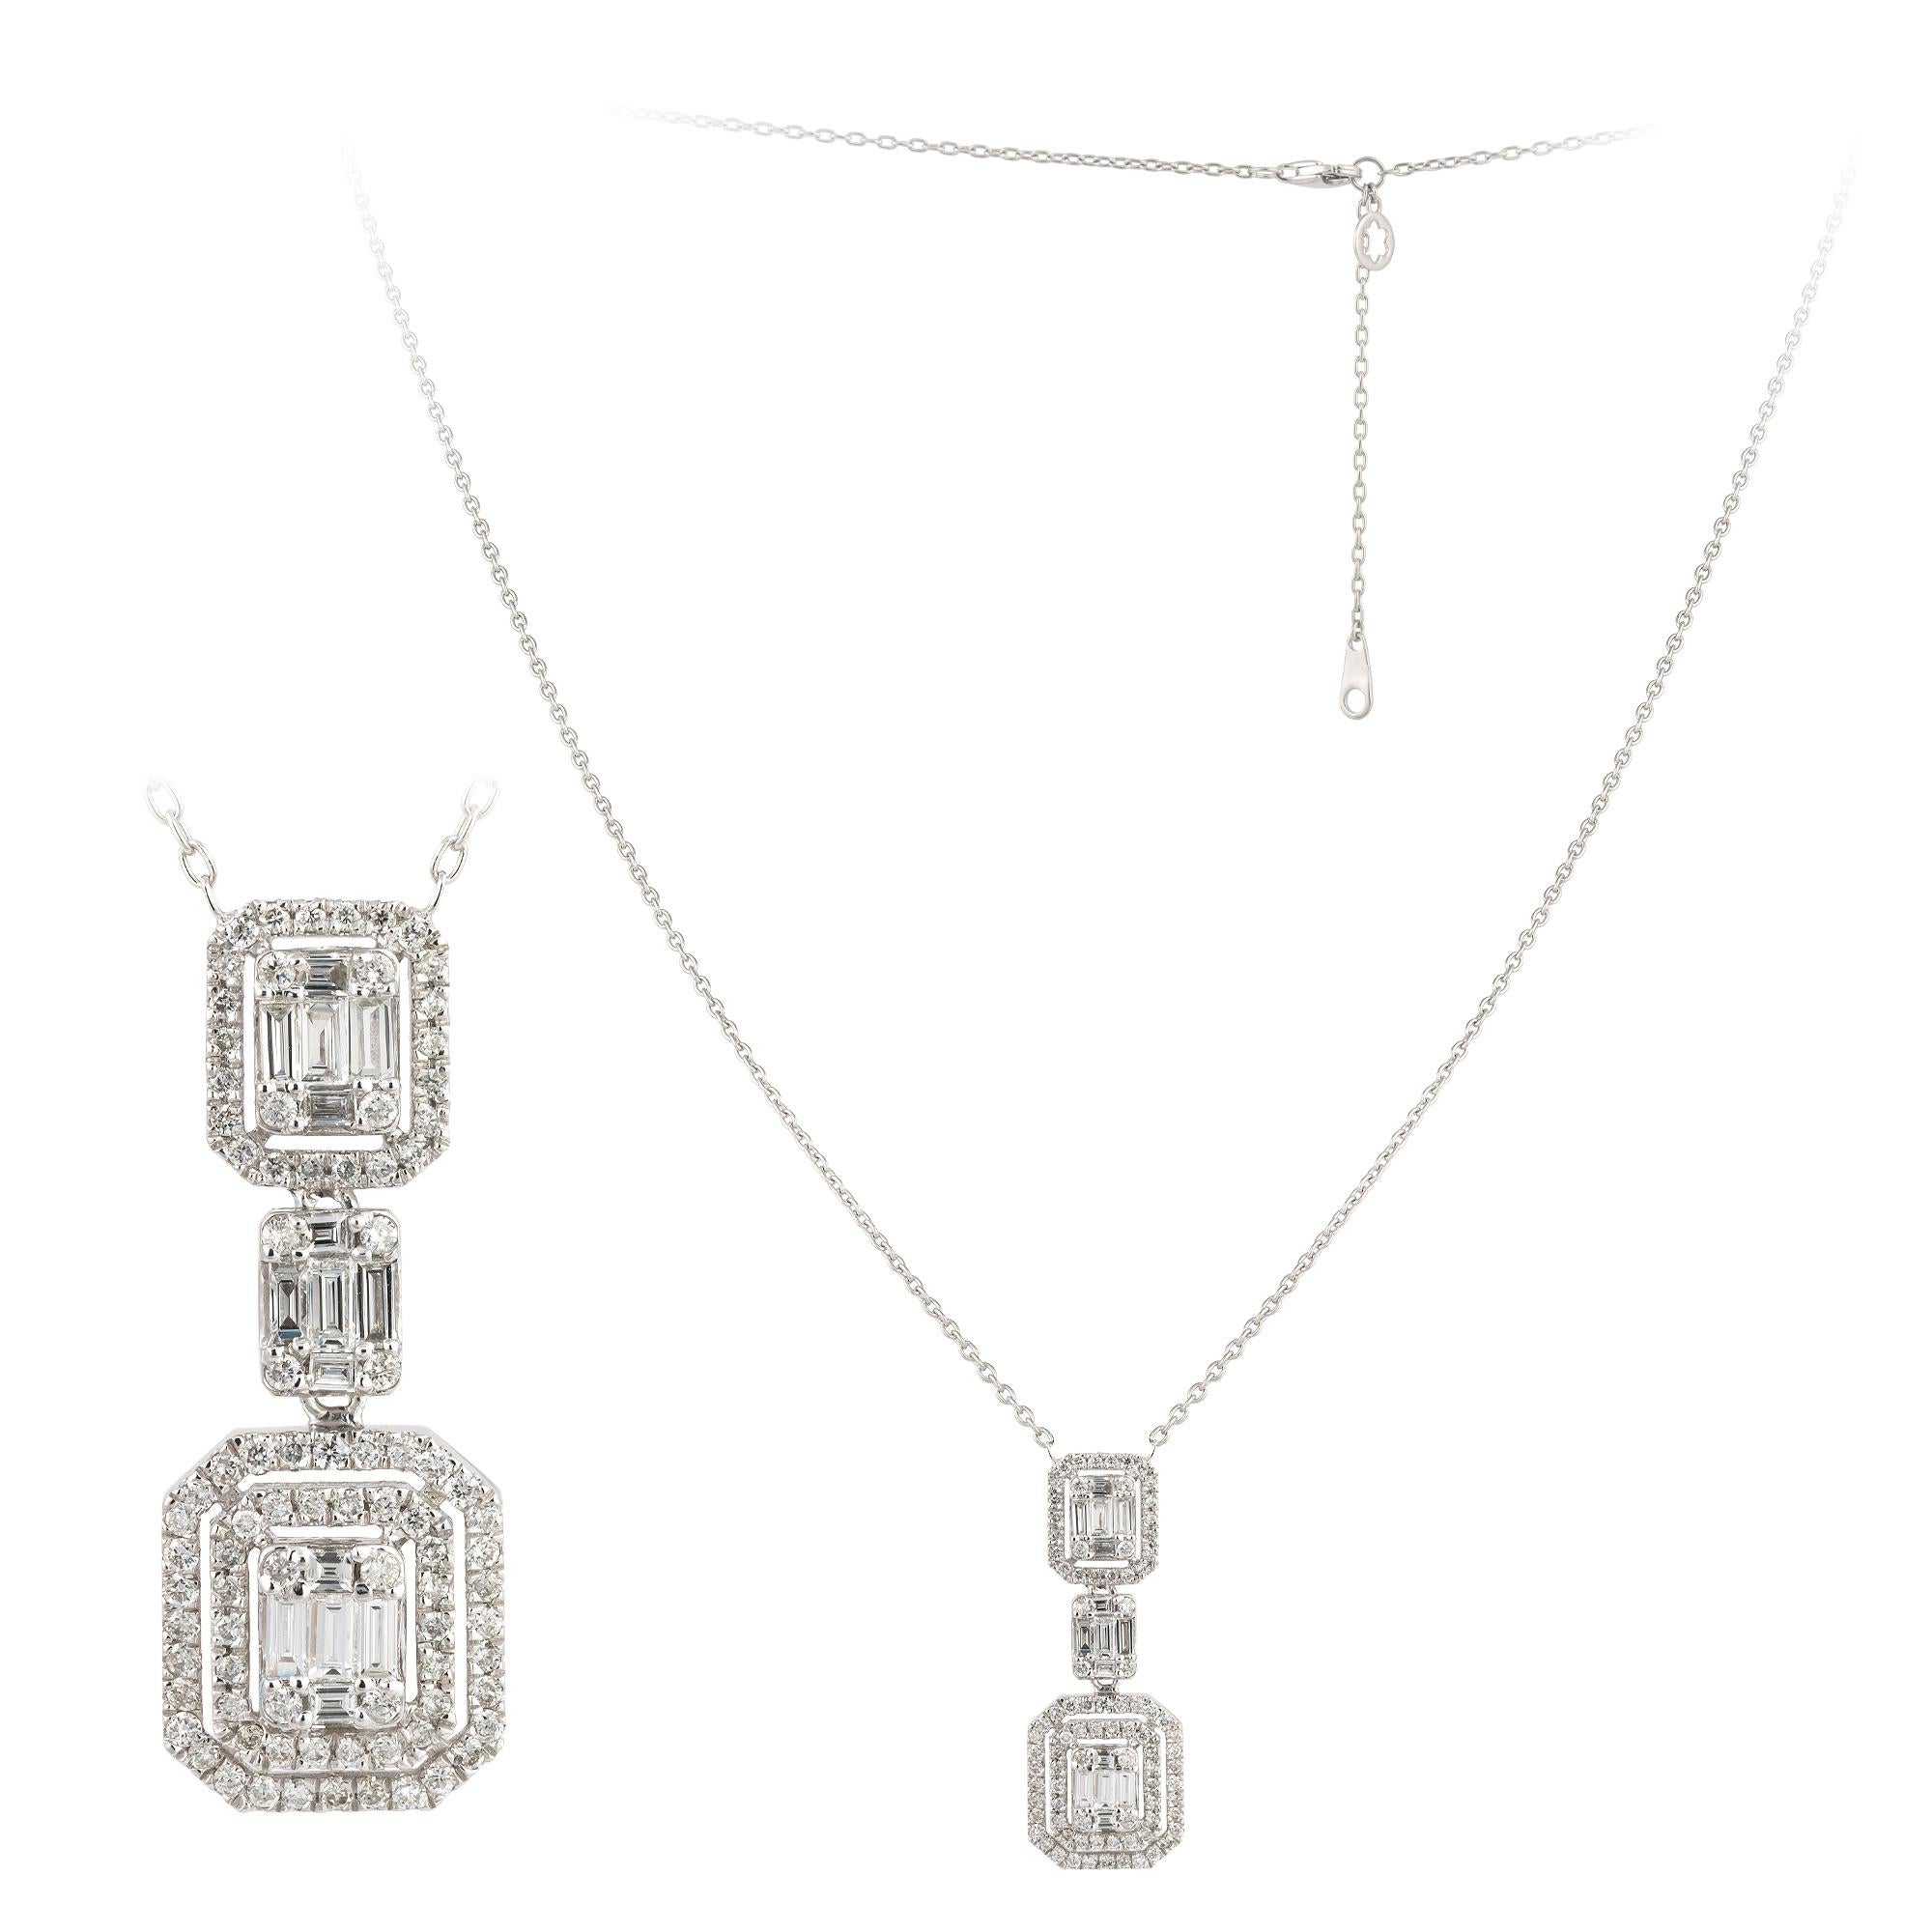 NECKLACE 18K White Gold Diamond 0.54 Cts/88 Pcs Tapered Baguette 0.41 Cts/15 Pcs
